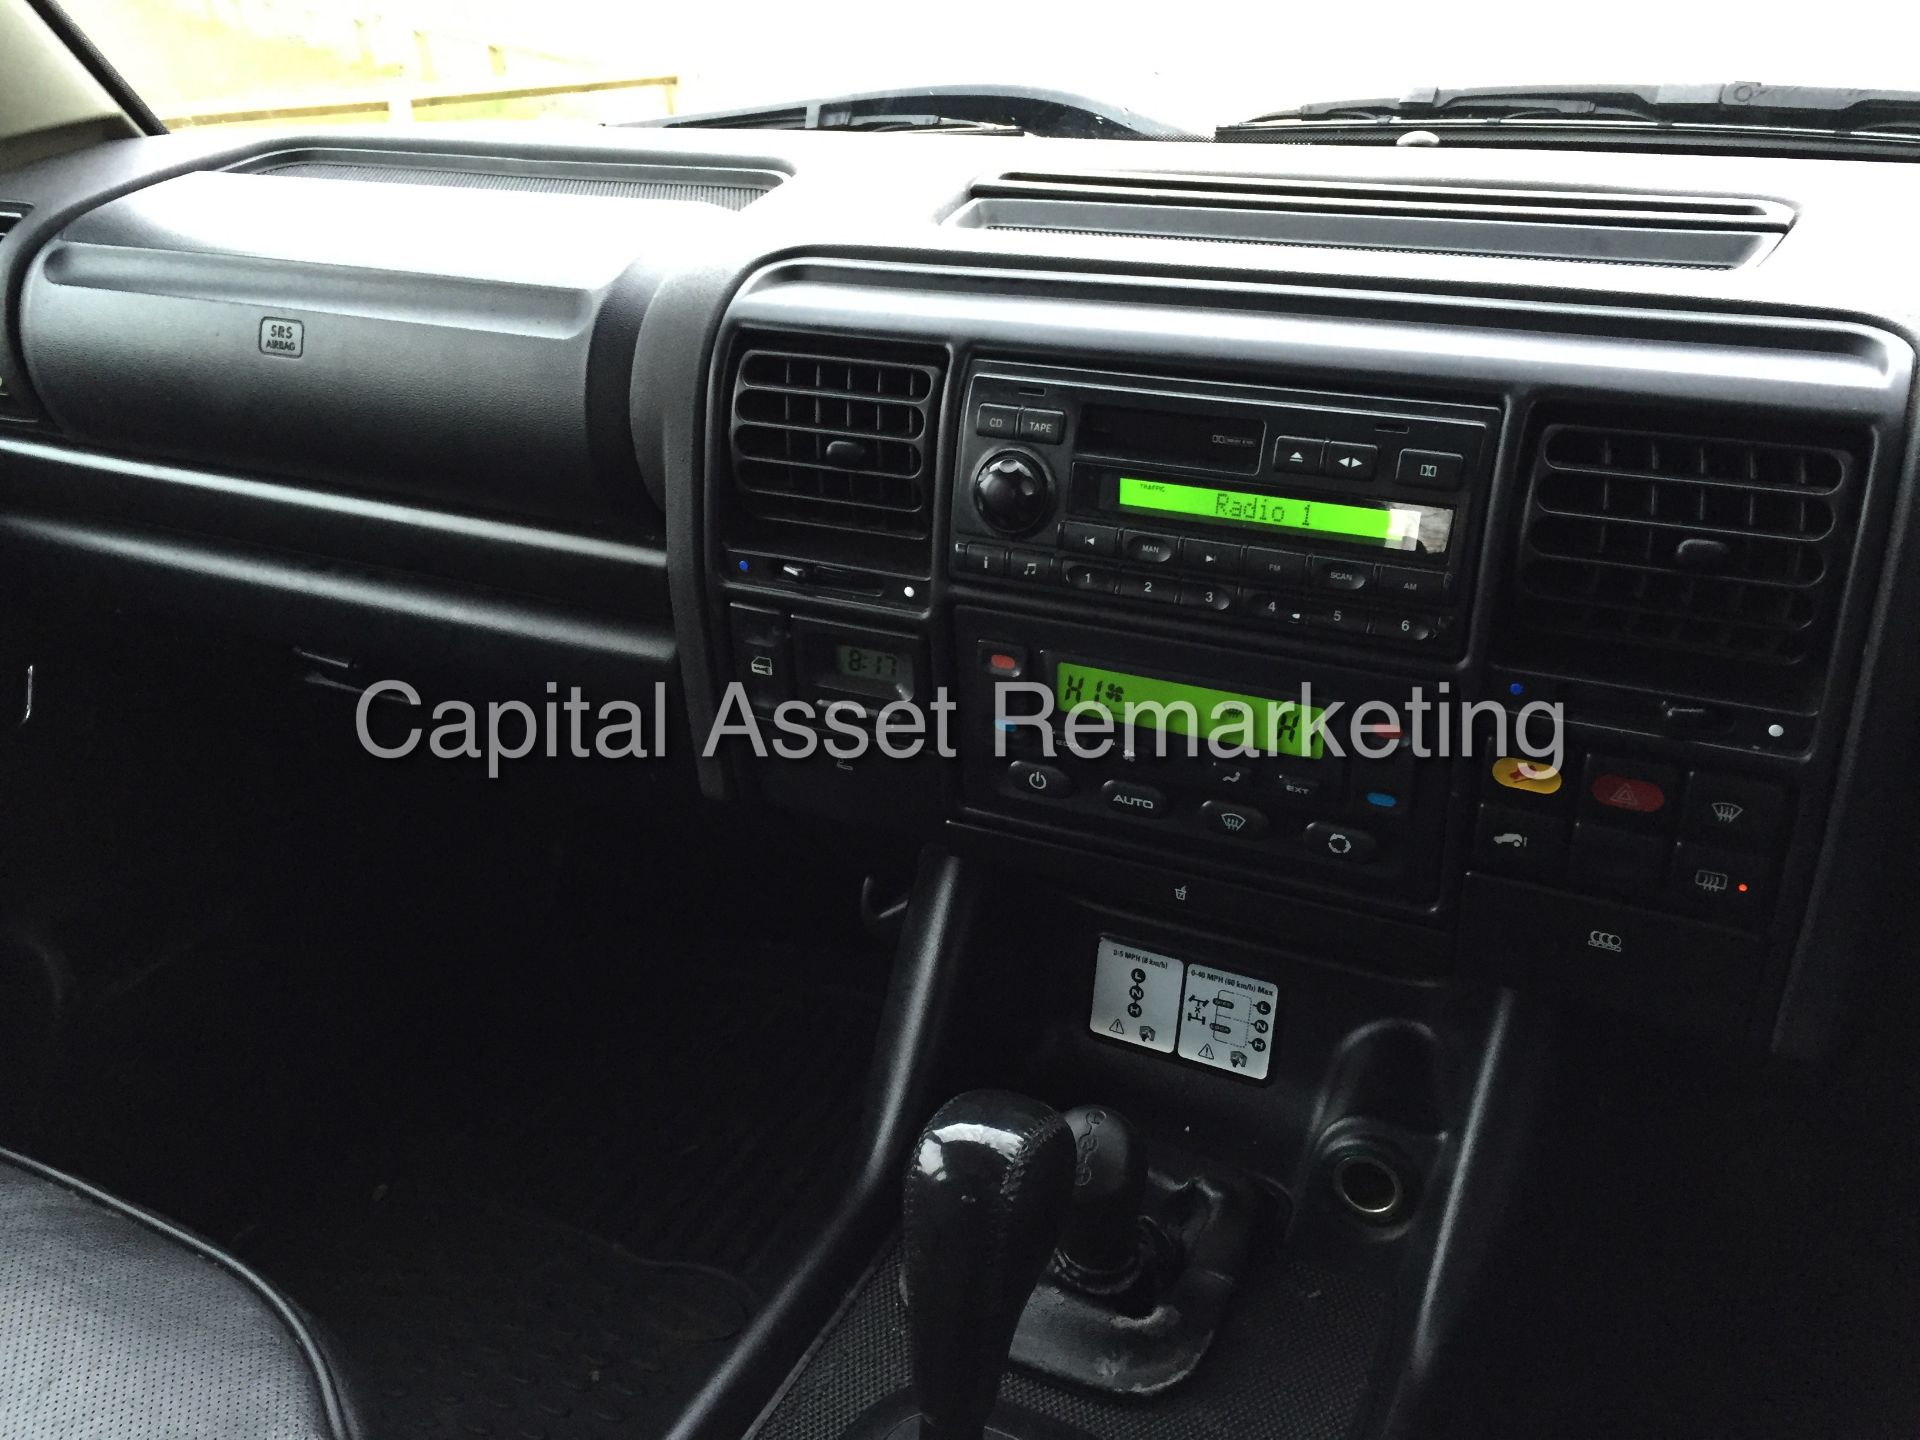 LAND ROVER DISCOVERY TD5 'LANDMARK' (2004 - 04 REG) 7 SEATER - LEATHER - AUTO (NO VAT - SAVE 20%) - Image 19 of 20